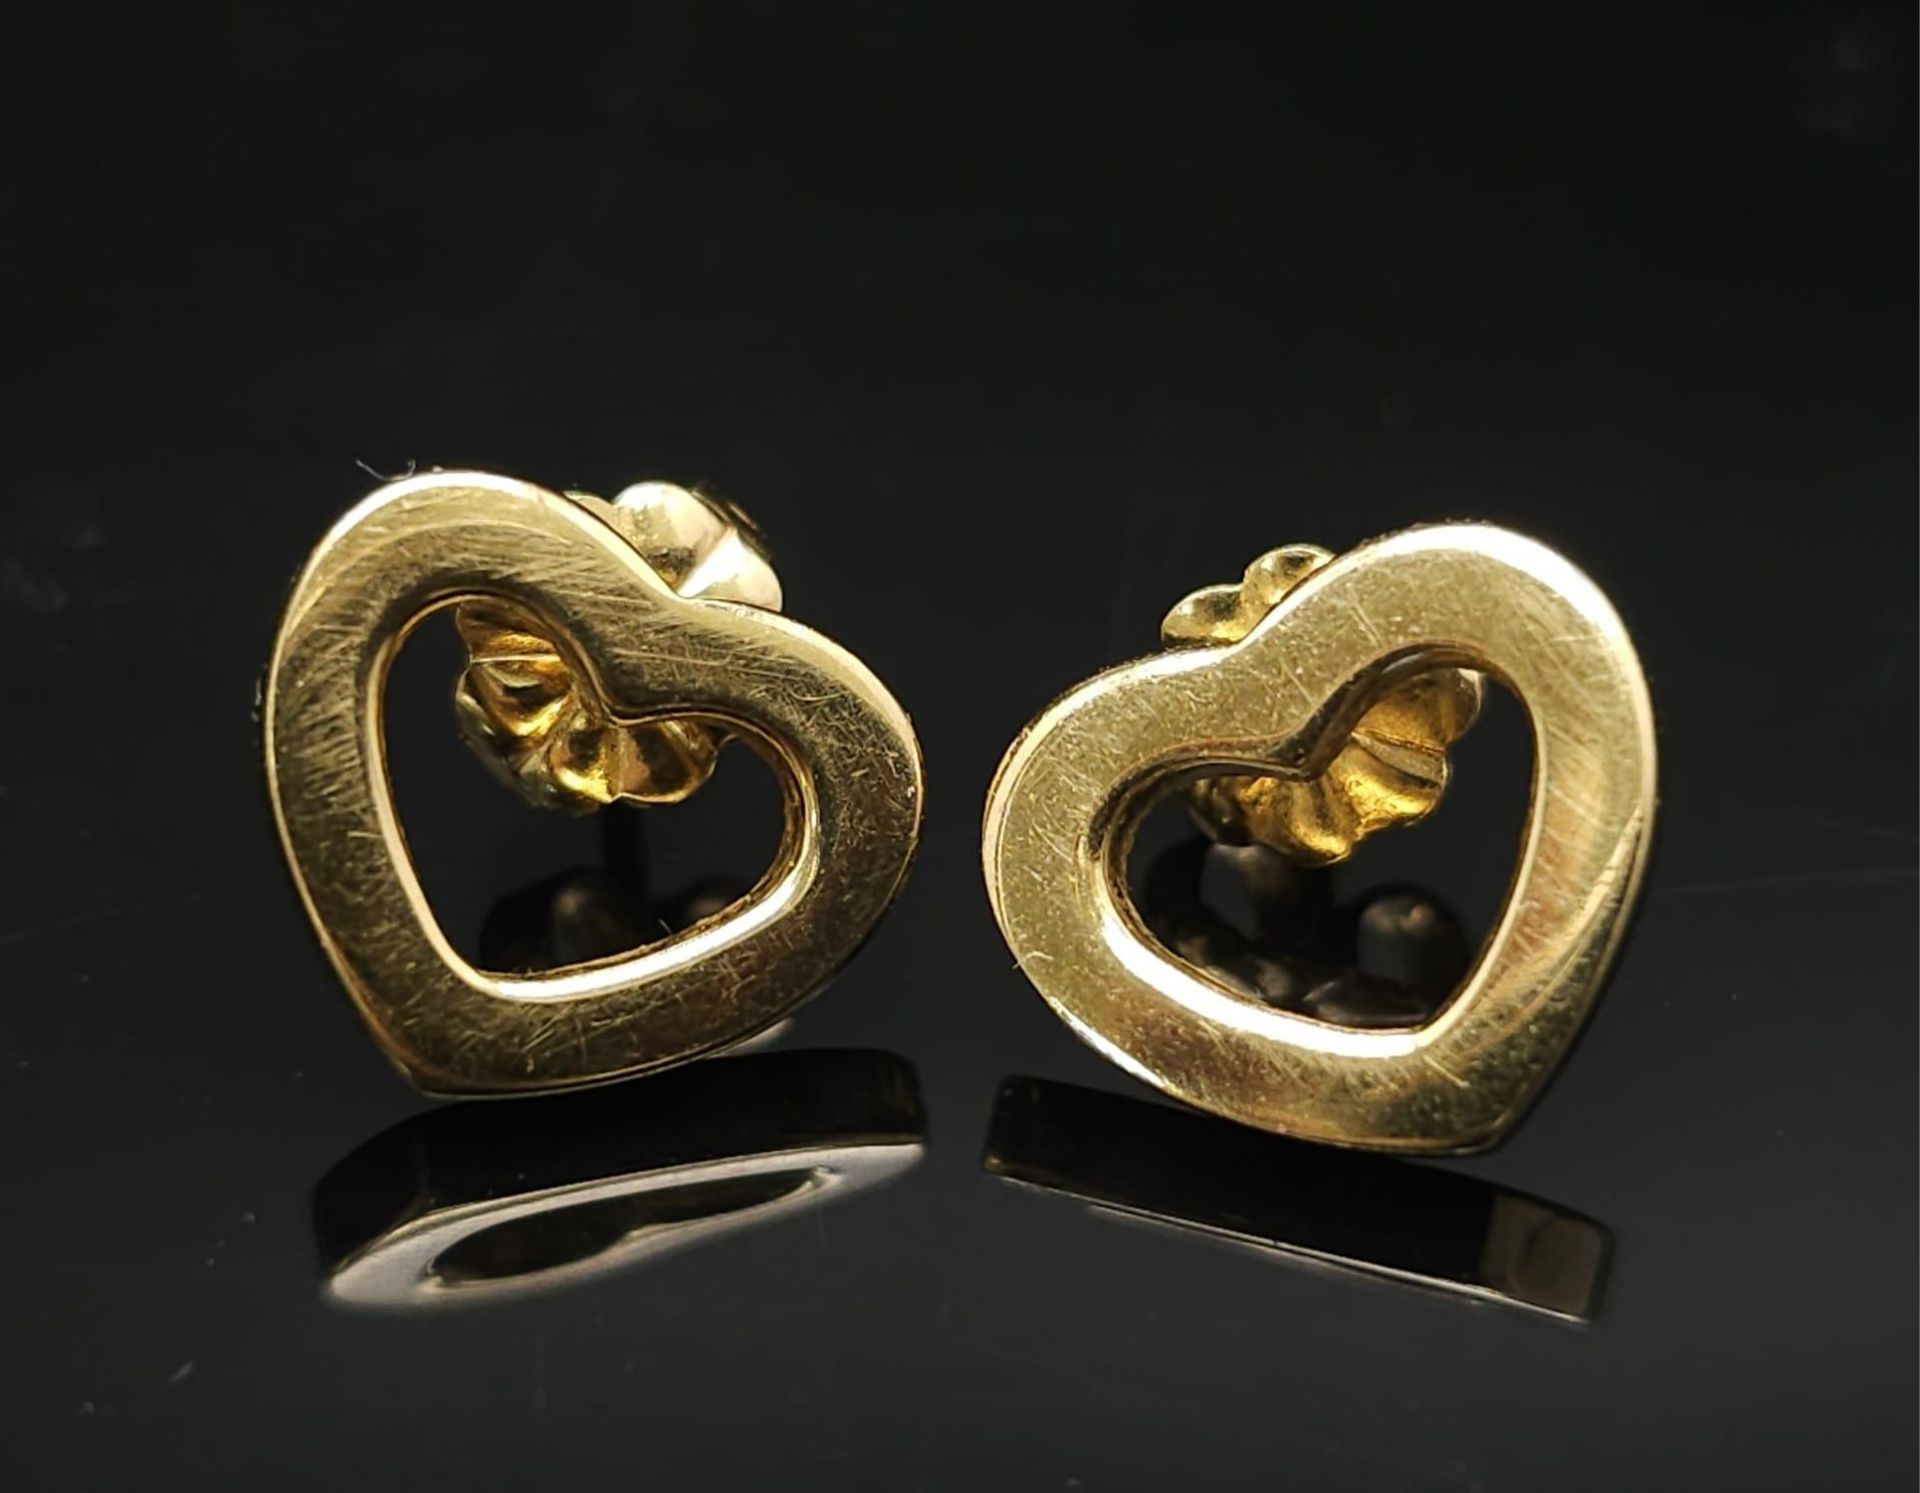 A CLASSIC PAIR OF TIFFANY & CO 18K YELLOW GOLD HEART STUD EARRINGS, WITH ORIGINAL TIFFANY & CO